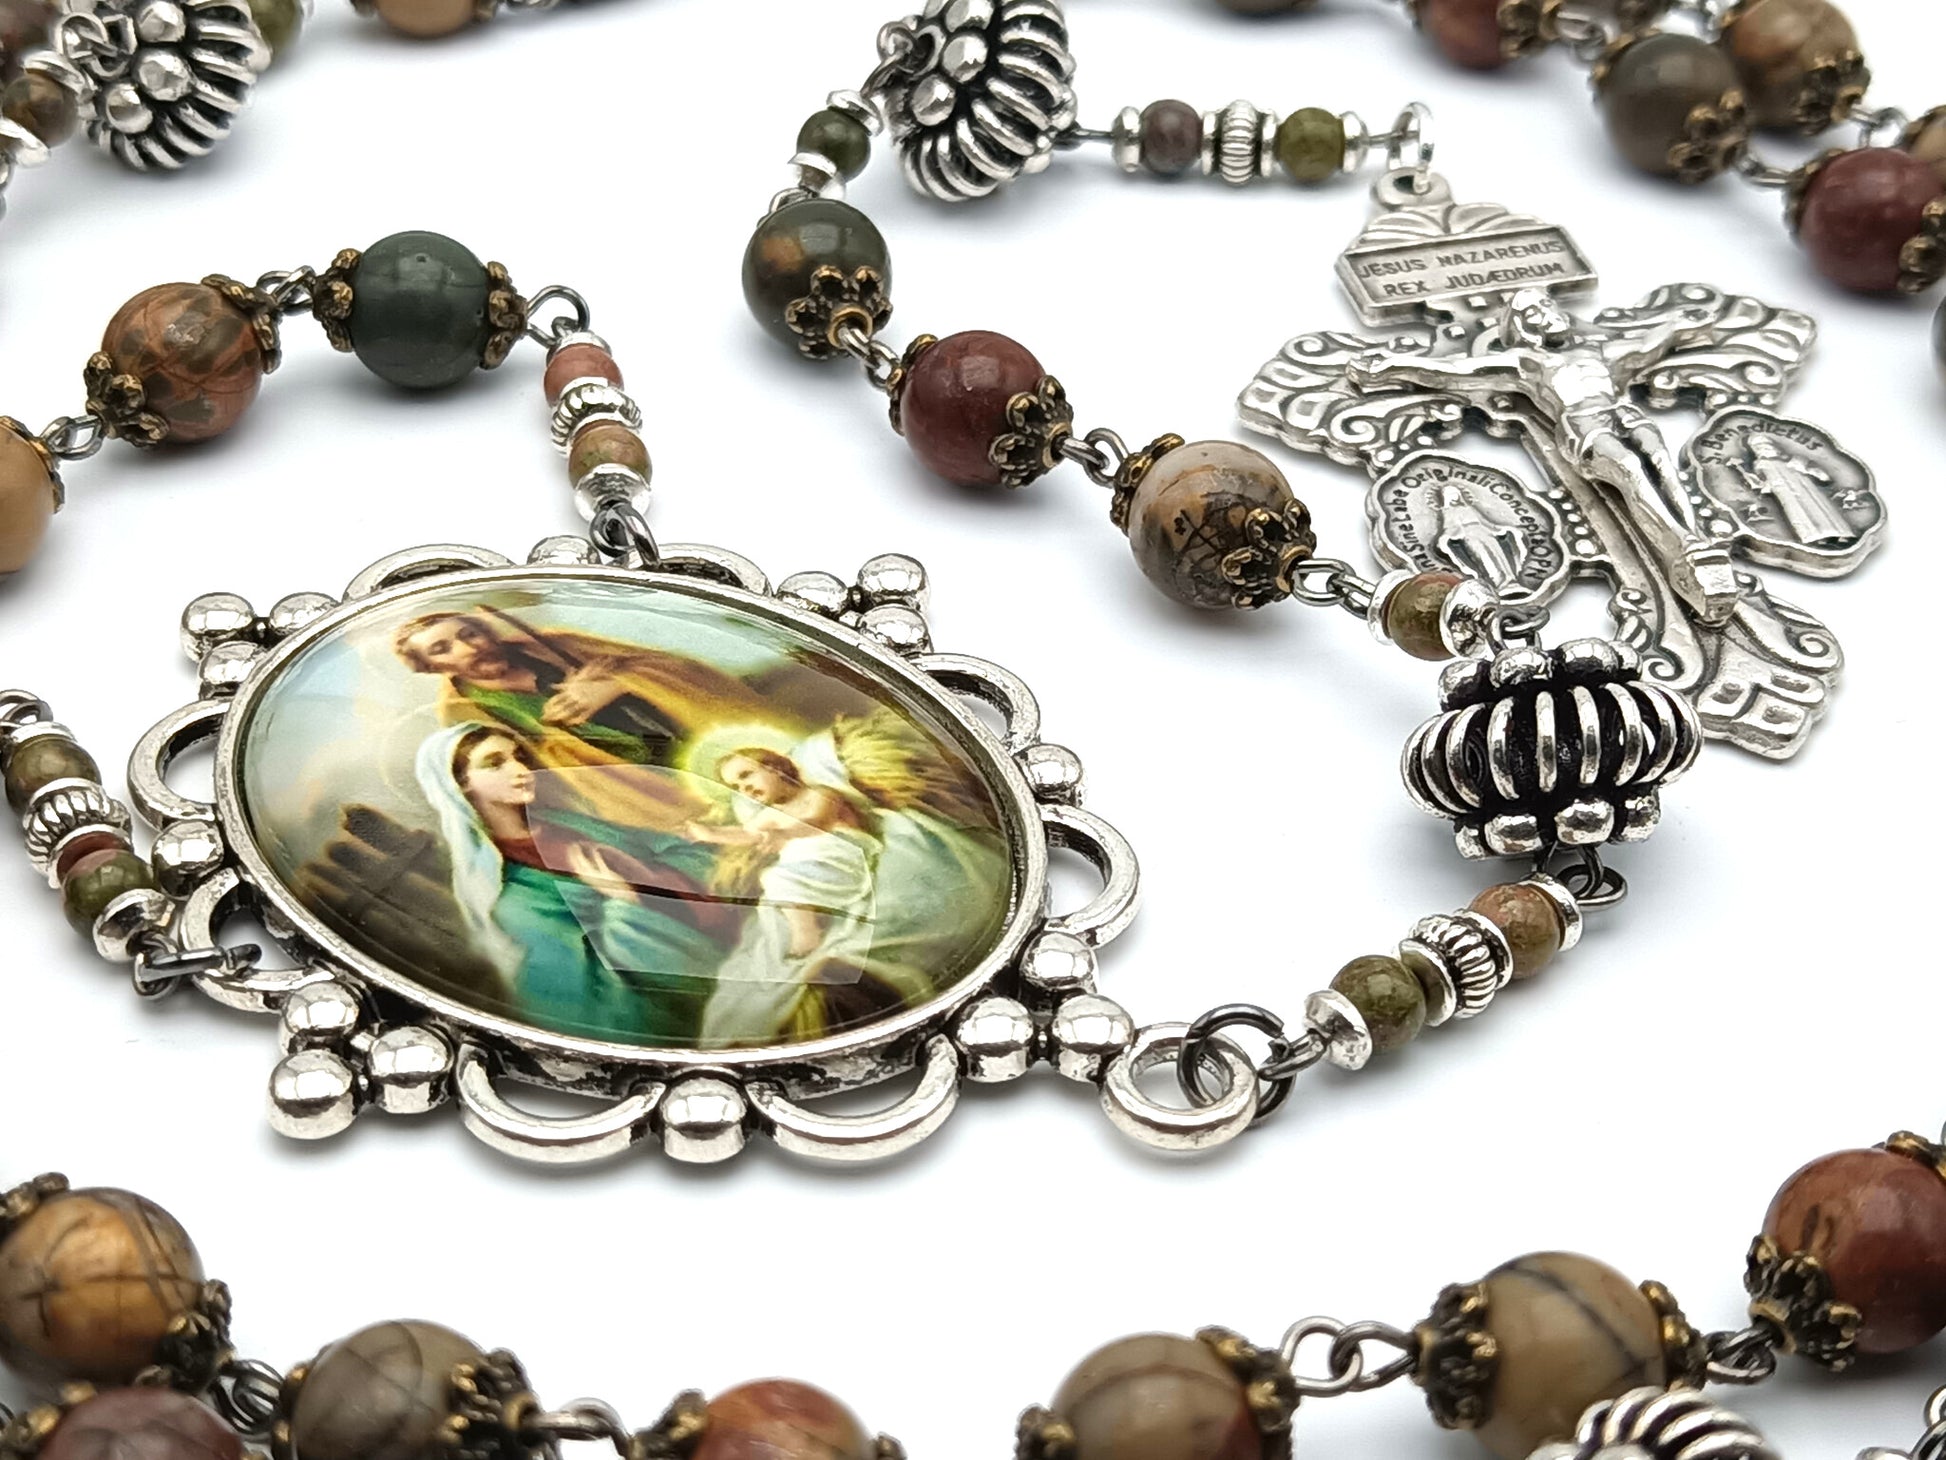 Holy Family unique rosary beads with gemstone beads, silver pardon crucifix, pater beads, and picture centre medal. 